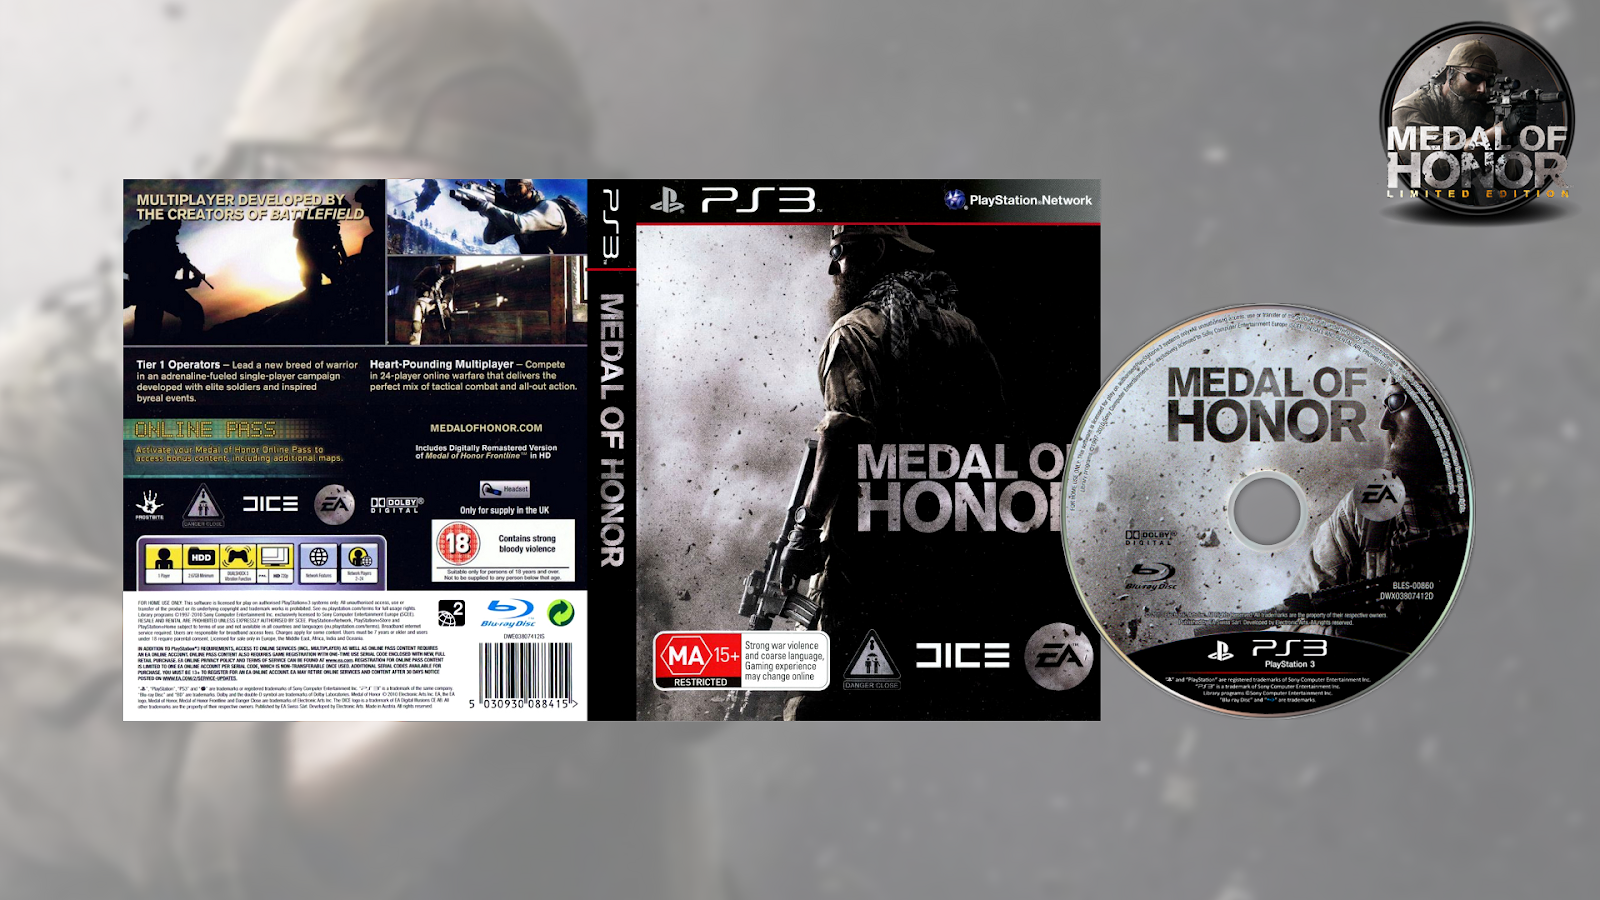 Medal of Honor Limited Edition ps3. Medal of Honor 2010 диск. Medal of Honor ps3 обложка. Медаль за отвагу на ps3. Medal of honor чит